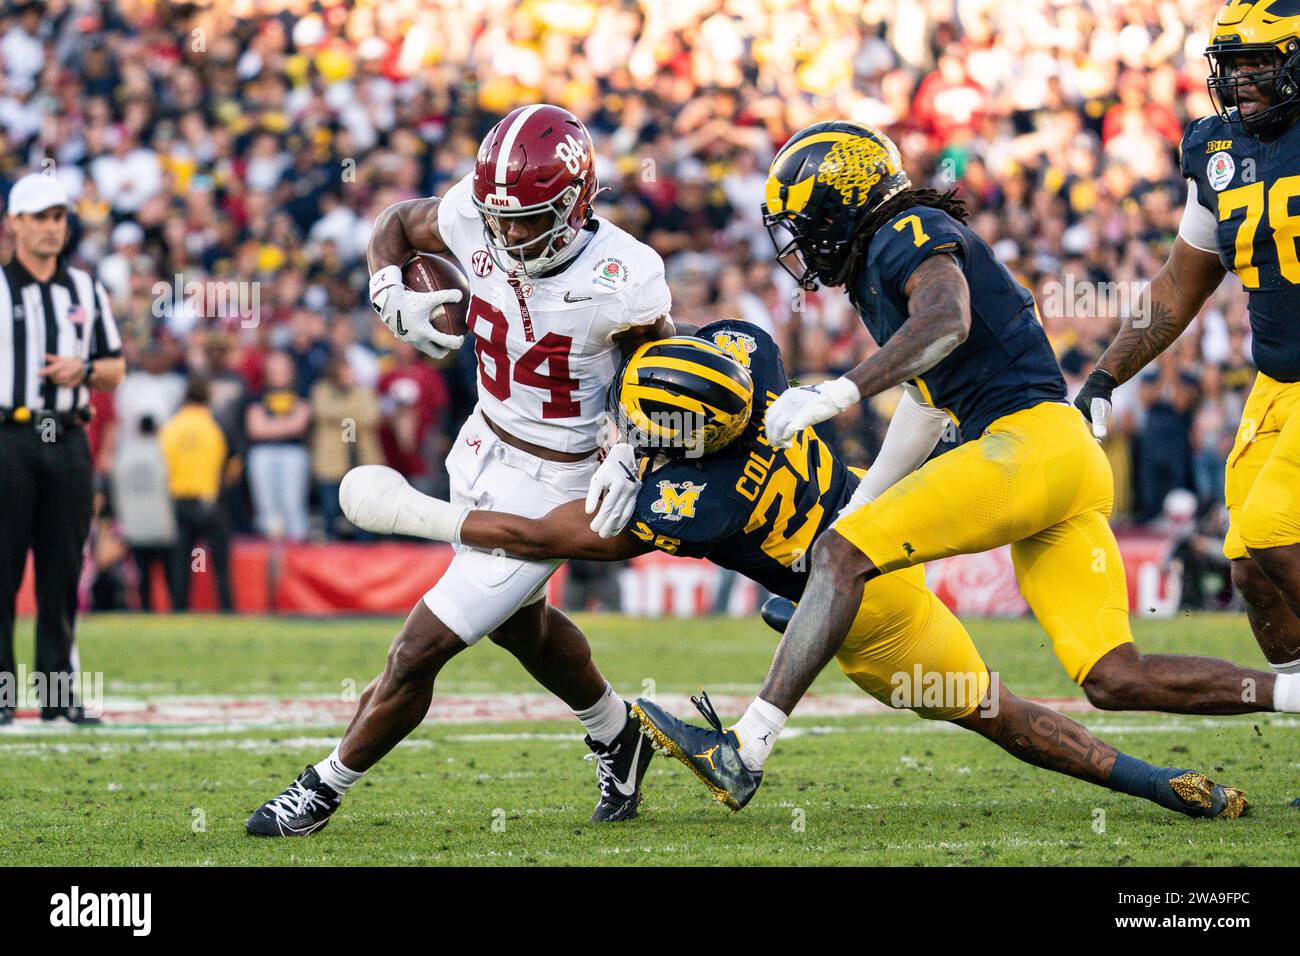 during the CFP Semifinal at the Rose Bowl Game between the Alabama Crimson Tide and Michigan Wolverines, Monday, January 1, 2023, at the Rose Bowl, in Stock Photo